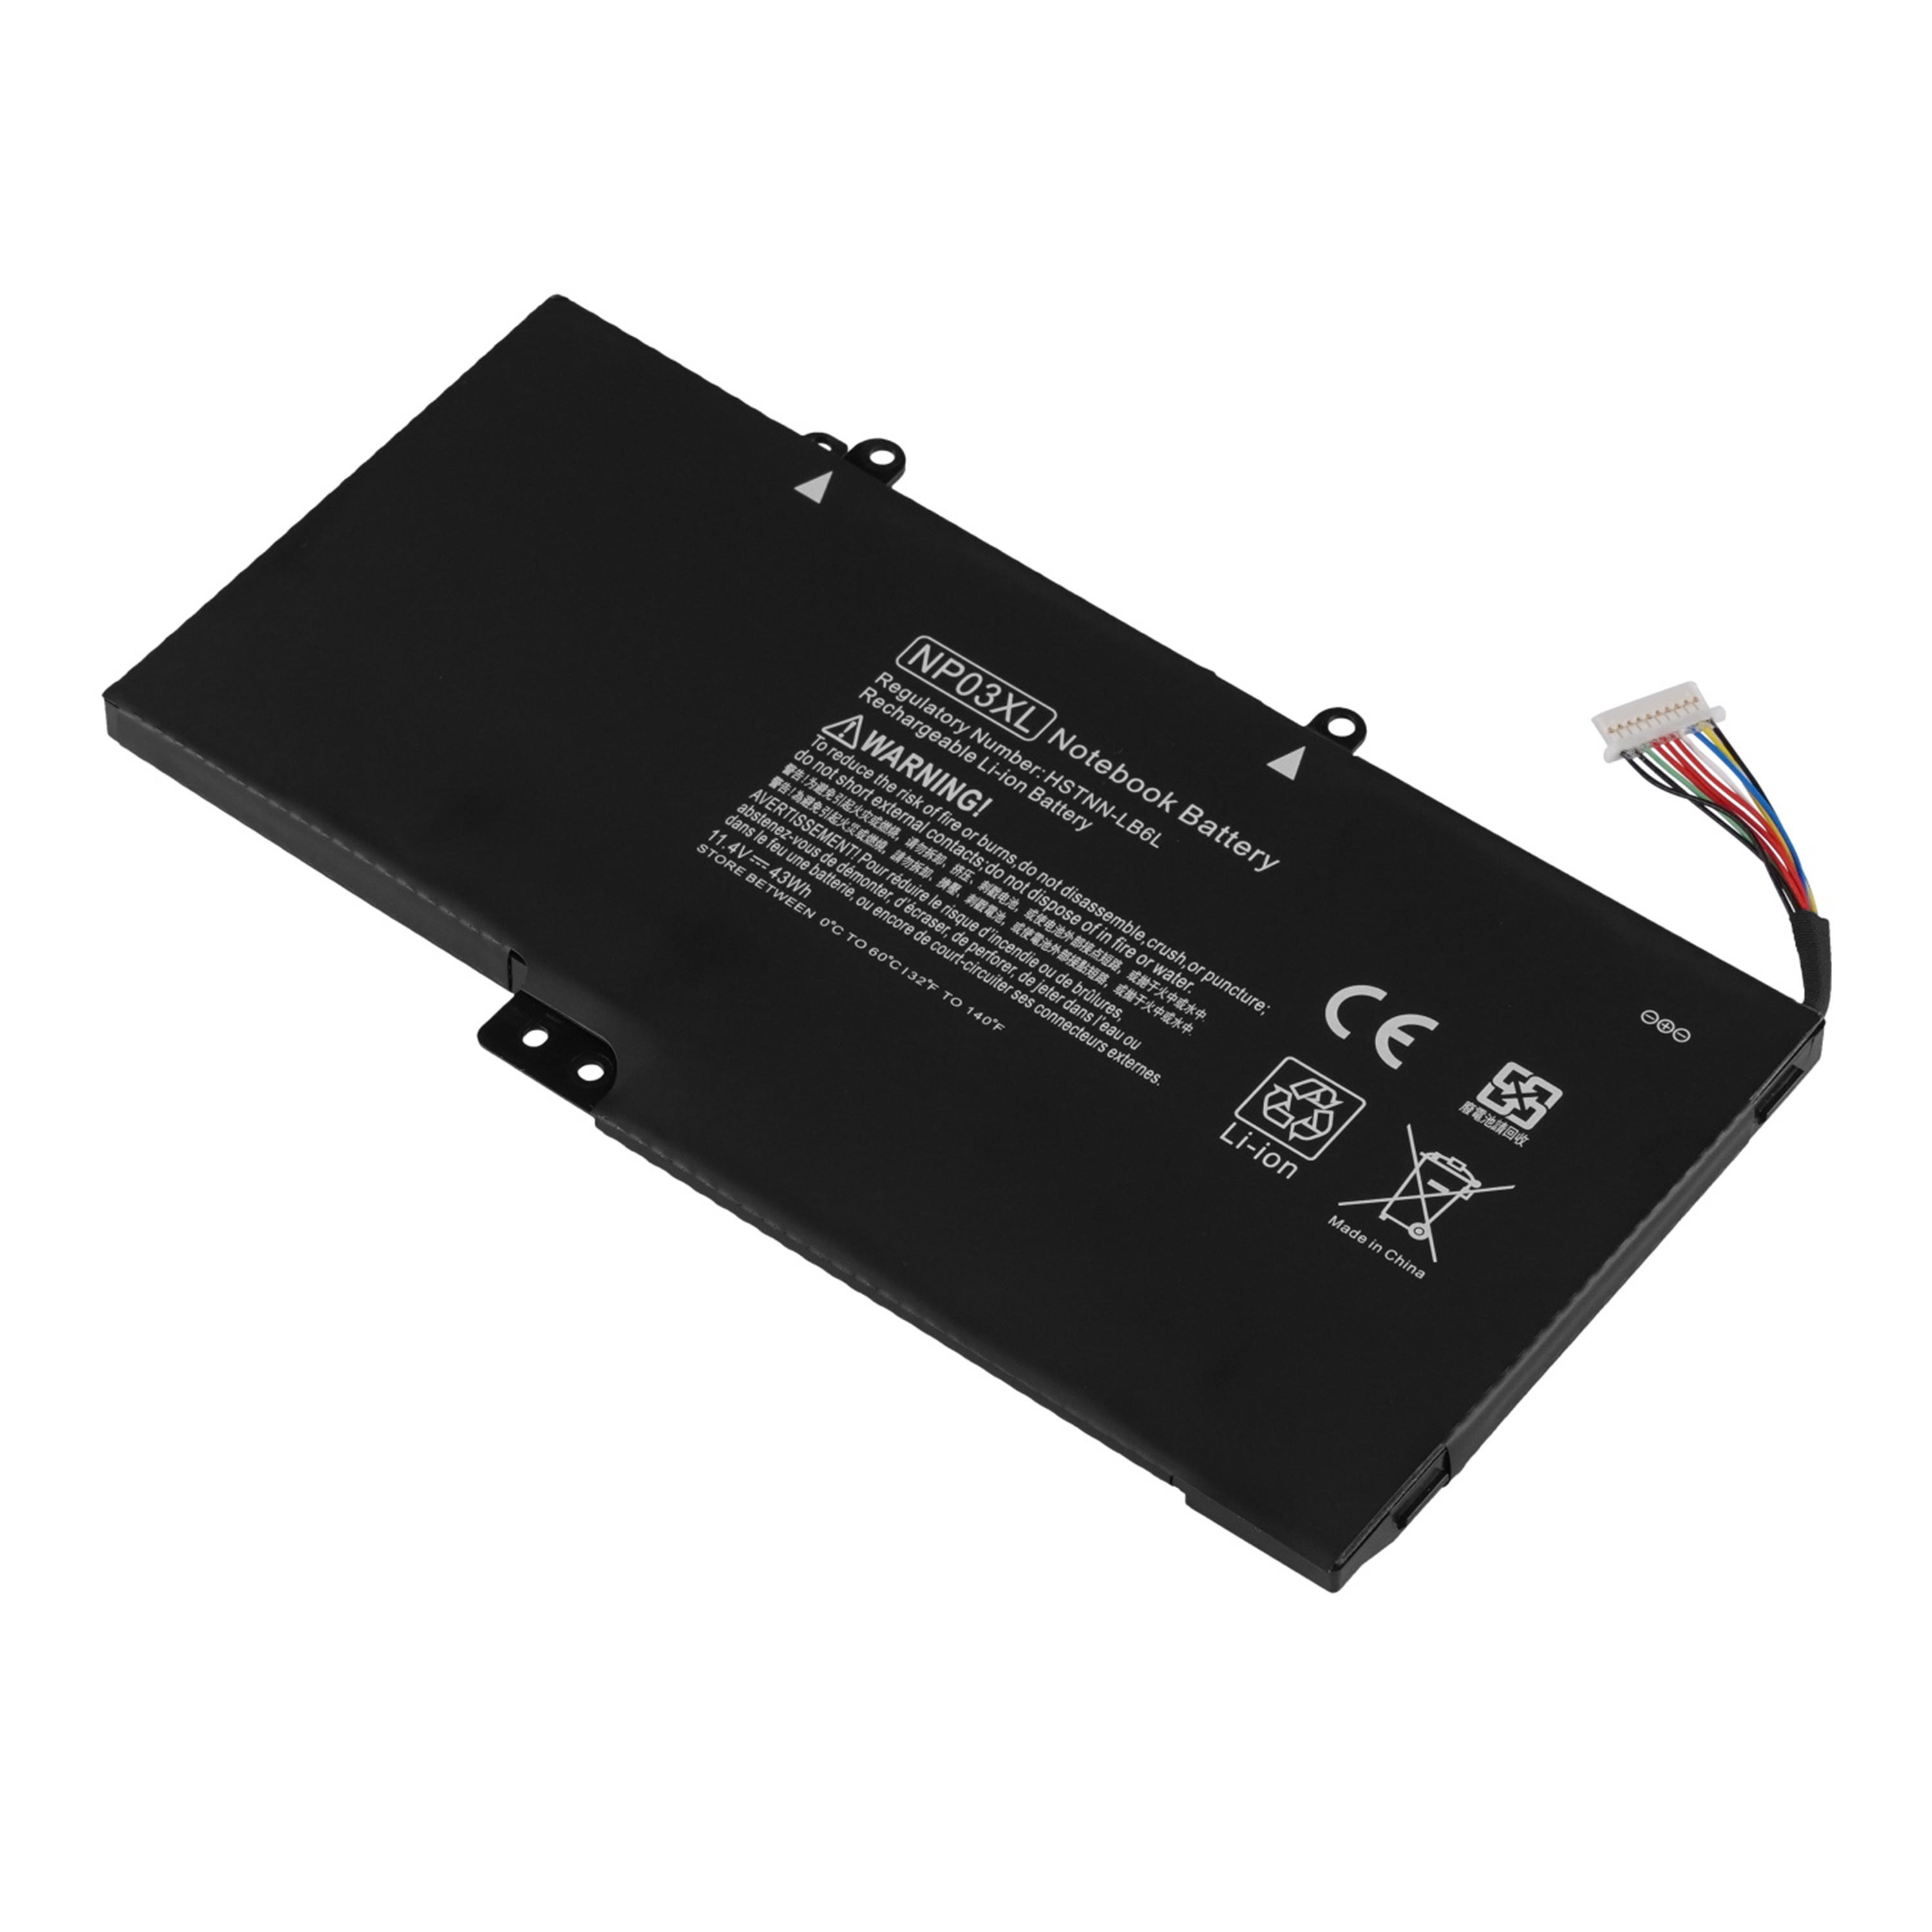 NP03XL rechargeable lithium ion Notebook battery Laptop battery for HP HP Envy X360 15-U010DX 15-U011DX 15-U110DX 15-U111DX 15-U337CL 15-U050CA,HP Pavilion X360 13-A010DX 13-A012DX 13-A013CL 13-A110DX